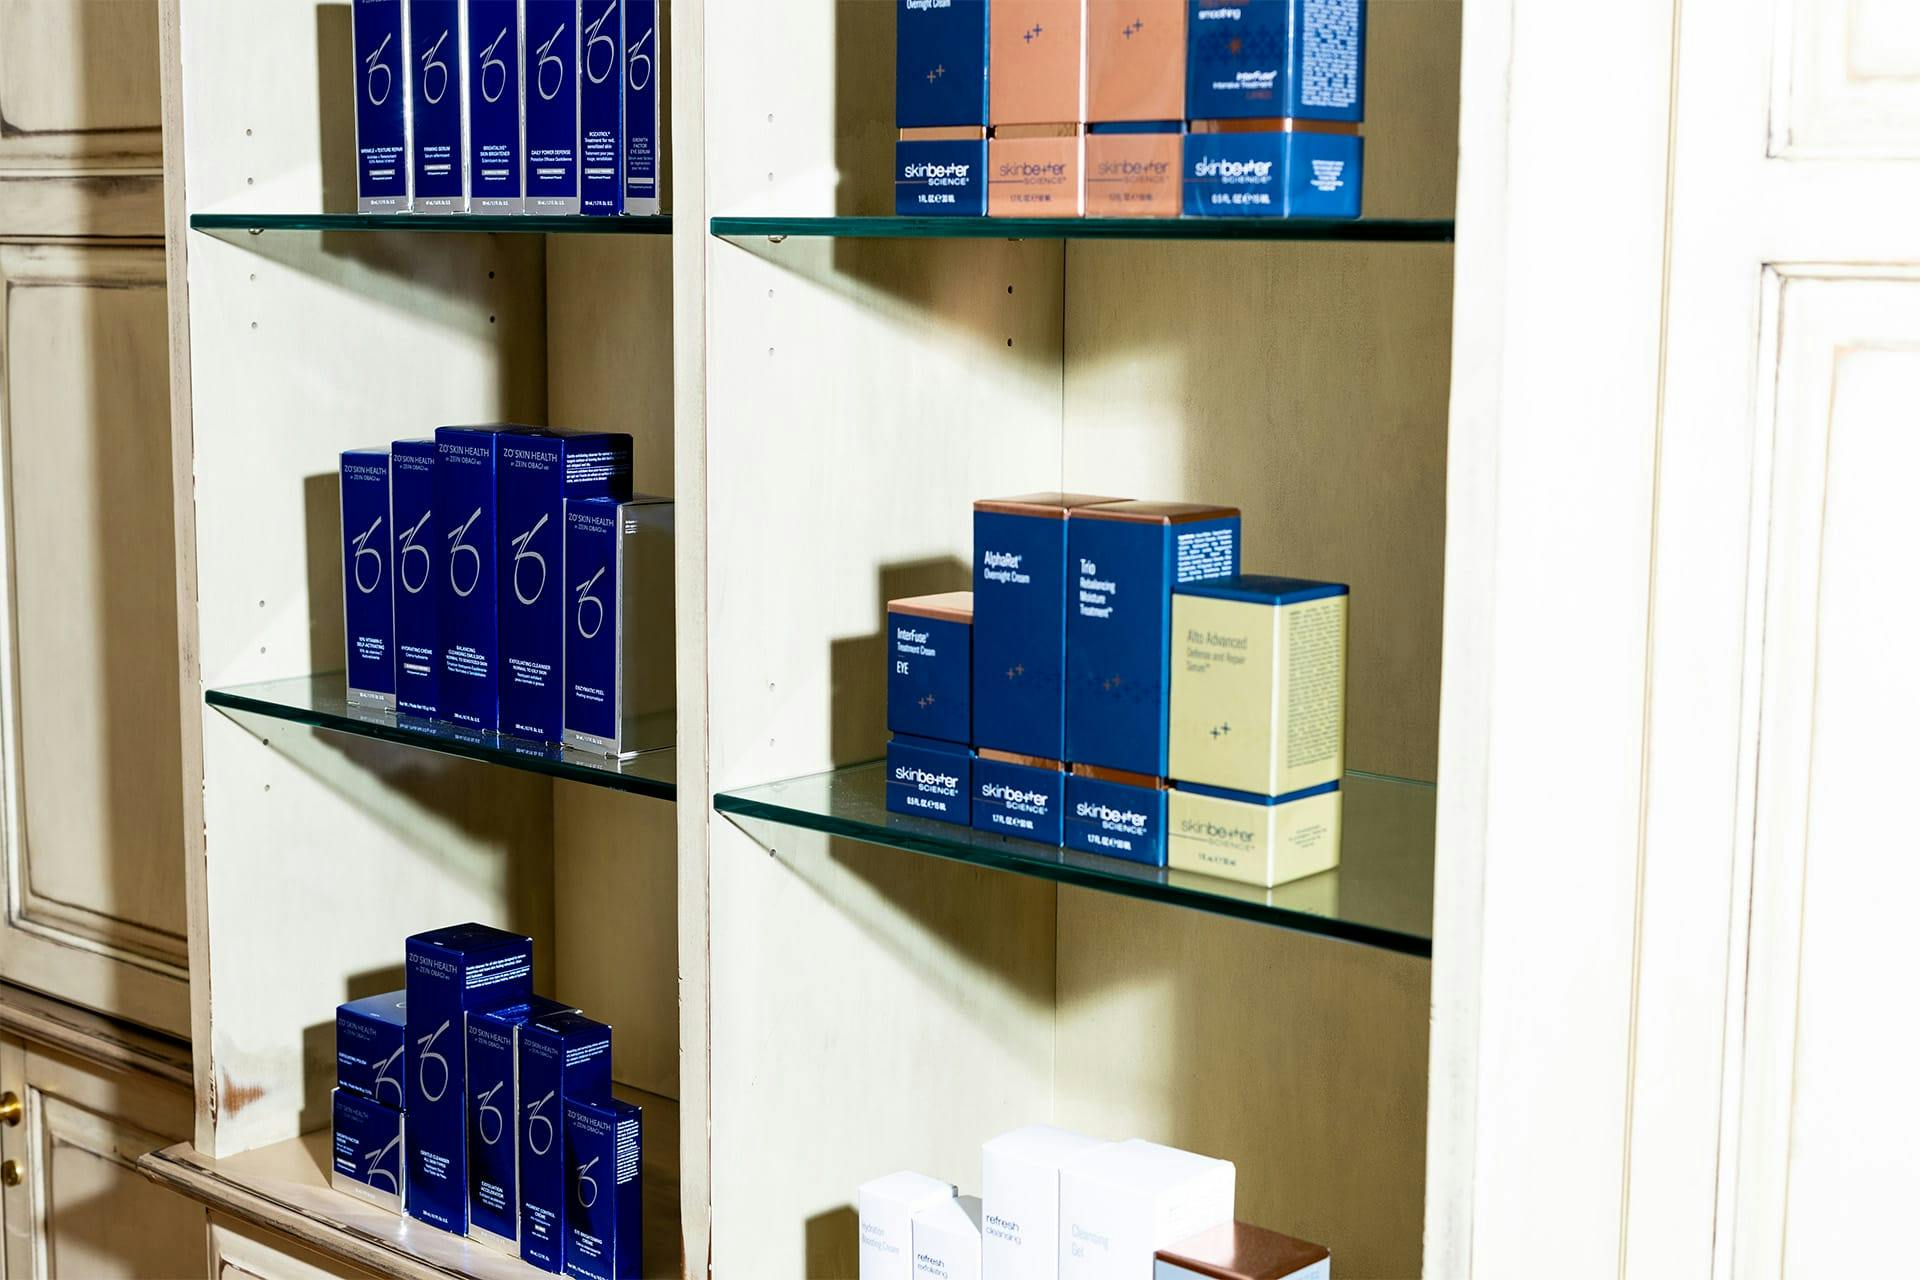 Skin care products displayed on shelves